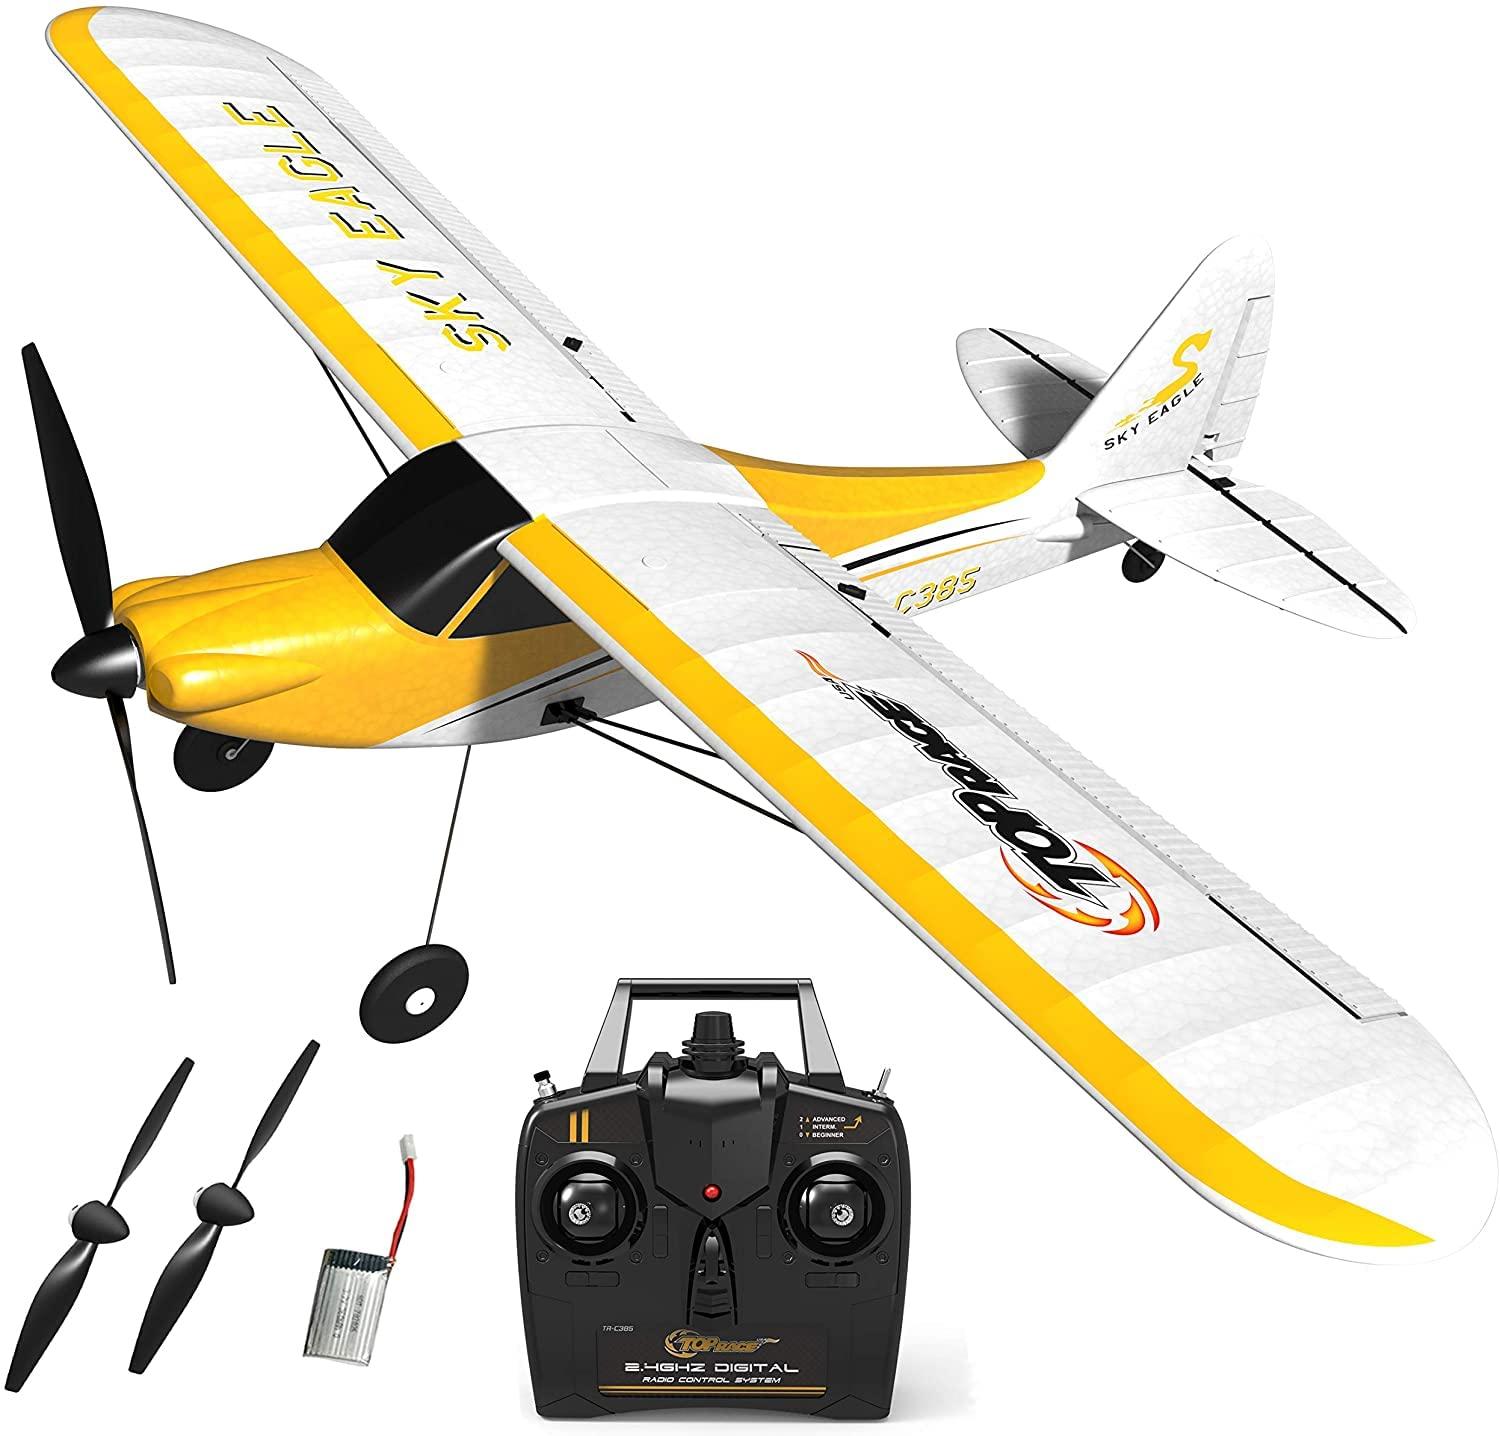 Remote Control Planes For Beginners: Beginner-friendly RC planes: Discovering the elements of flight.